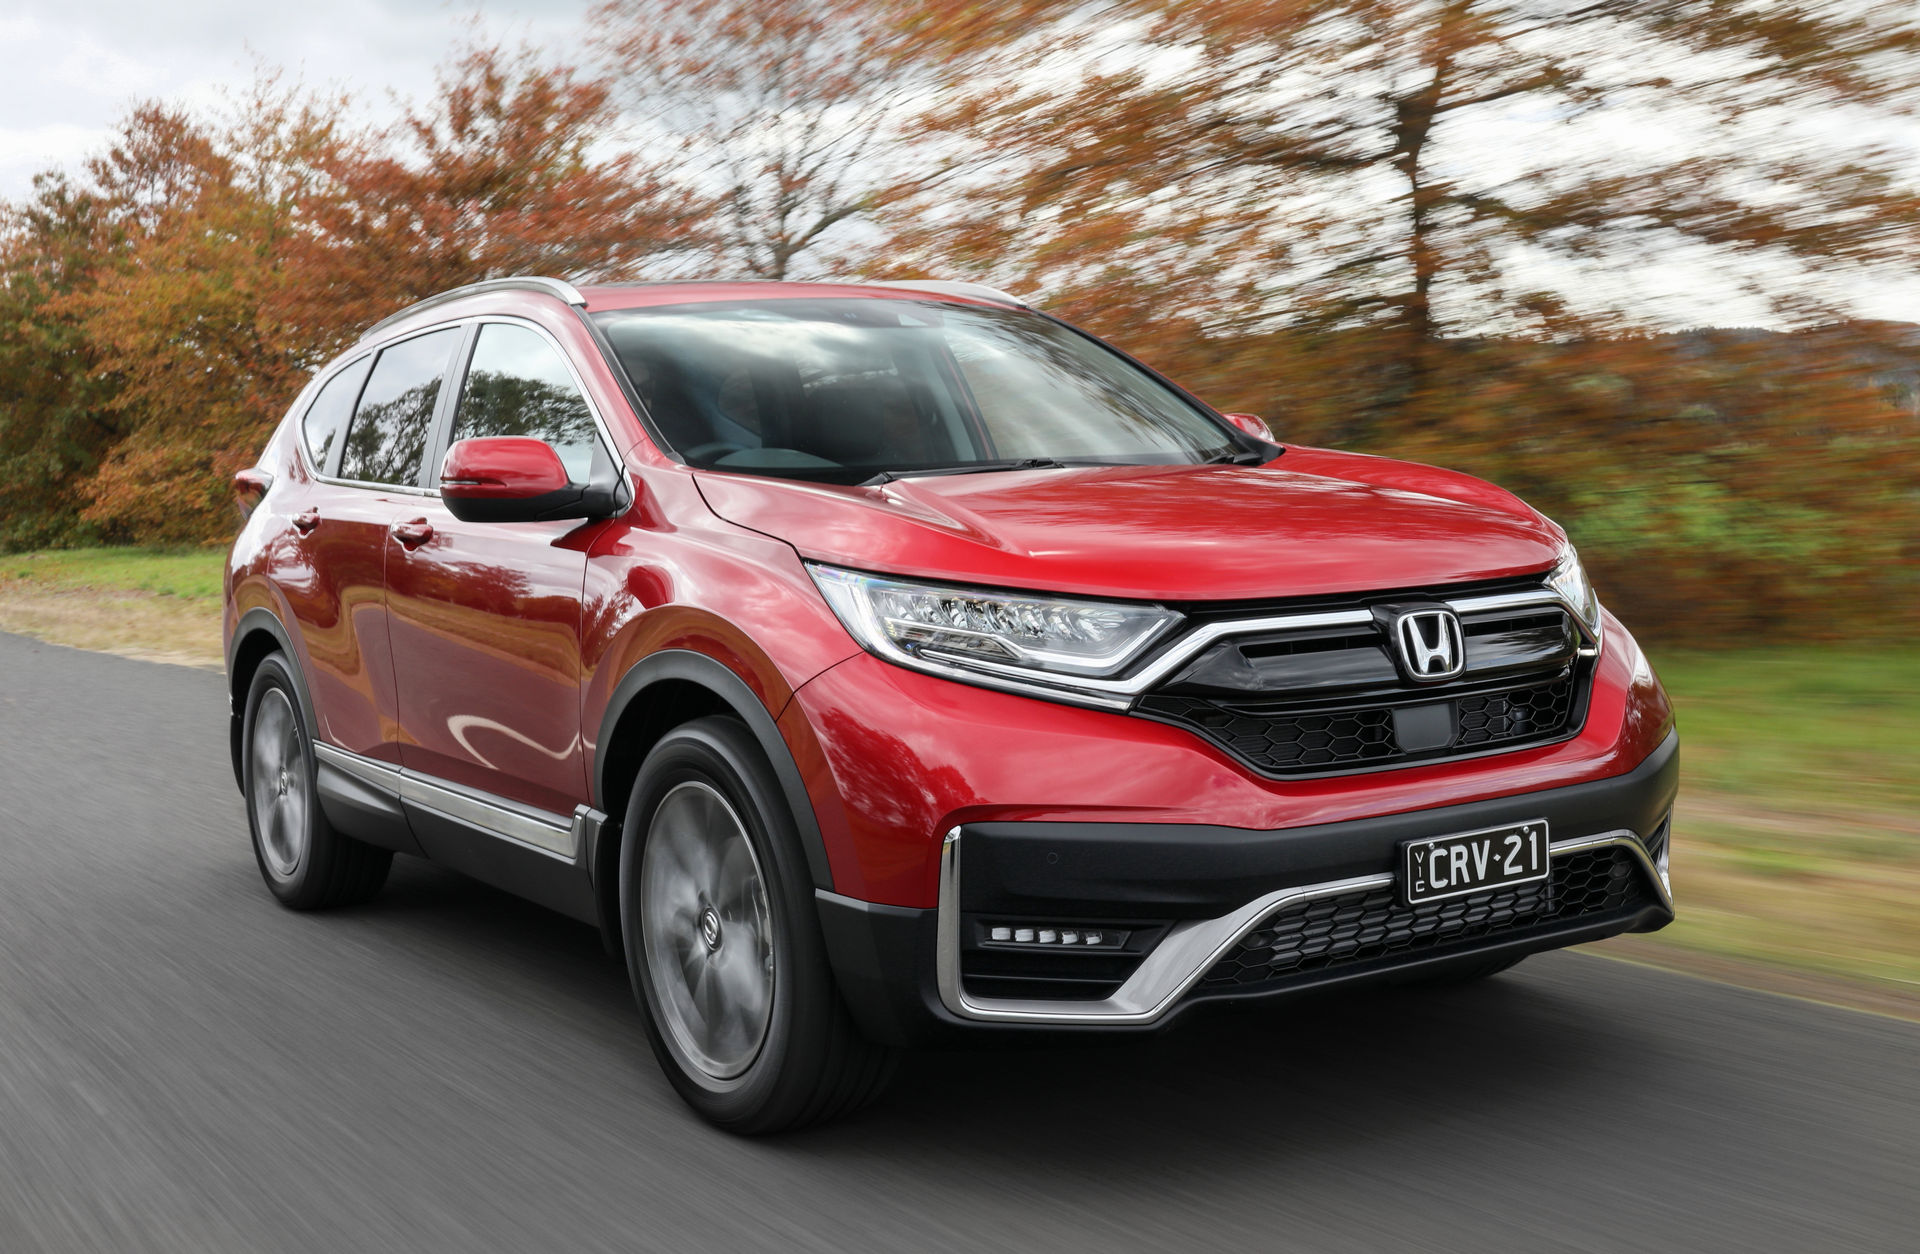 2021 Honda CRV Updated In Australia With New Safety Tech And More